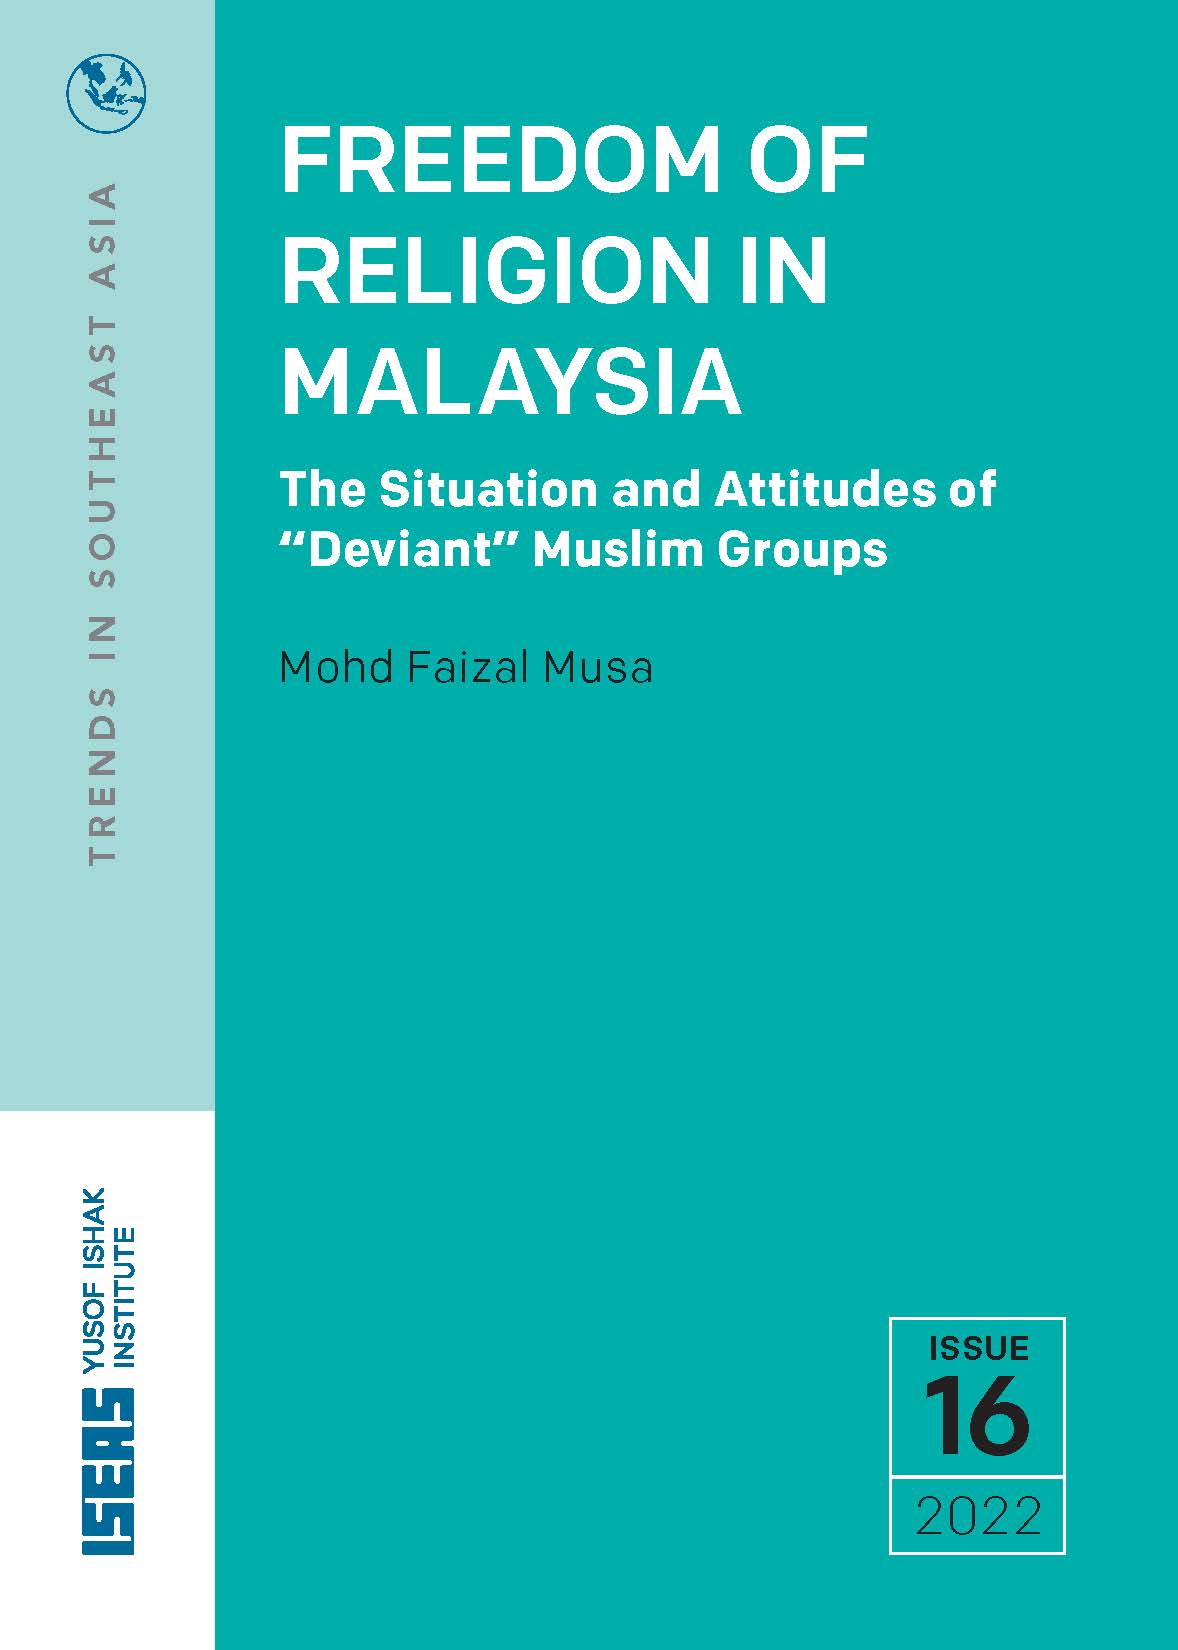 Freedom of religion in Malaysia: the situation and attitudes of deviant muslim groups